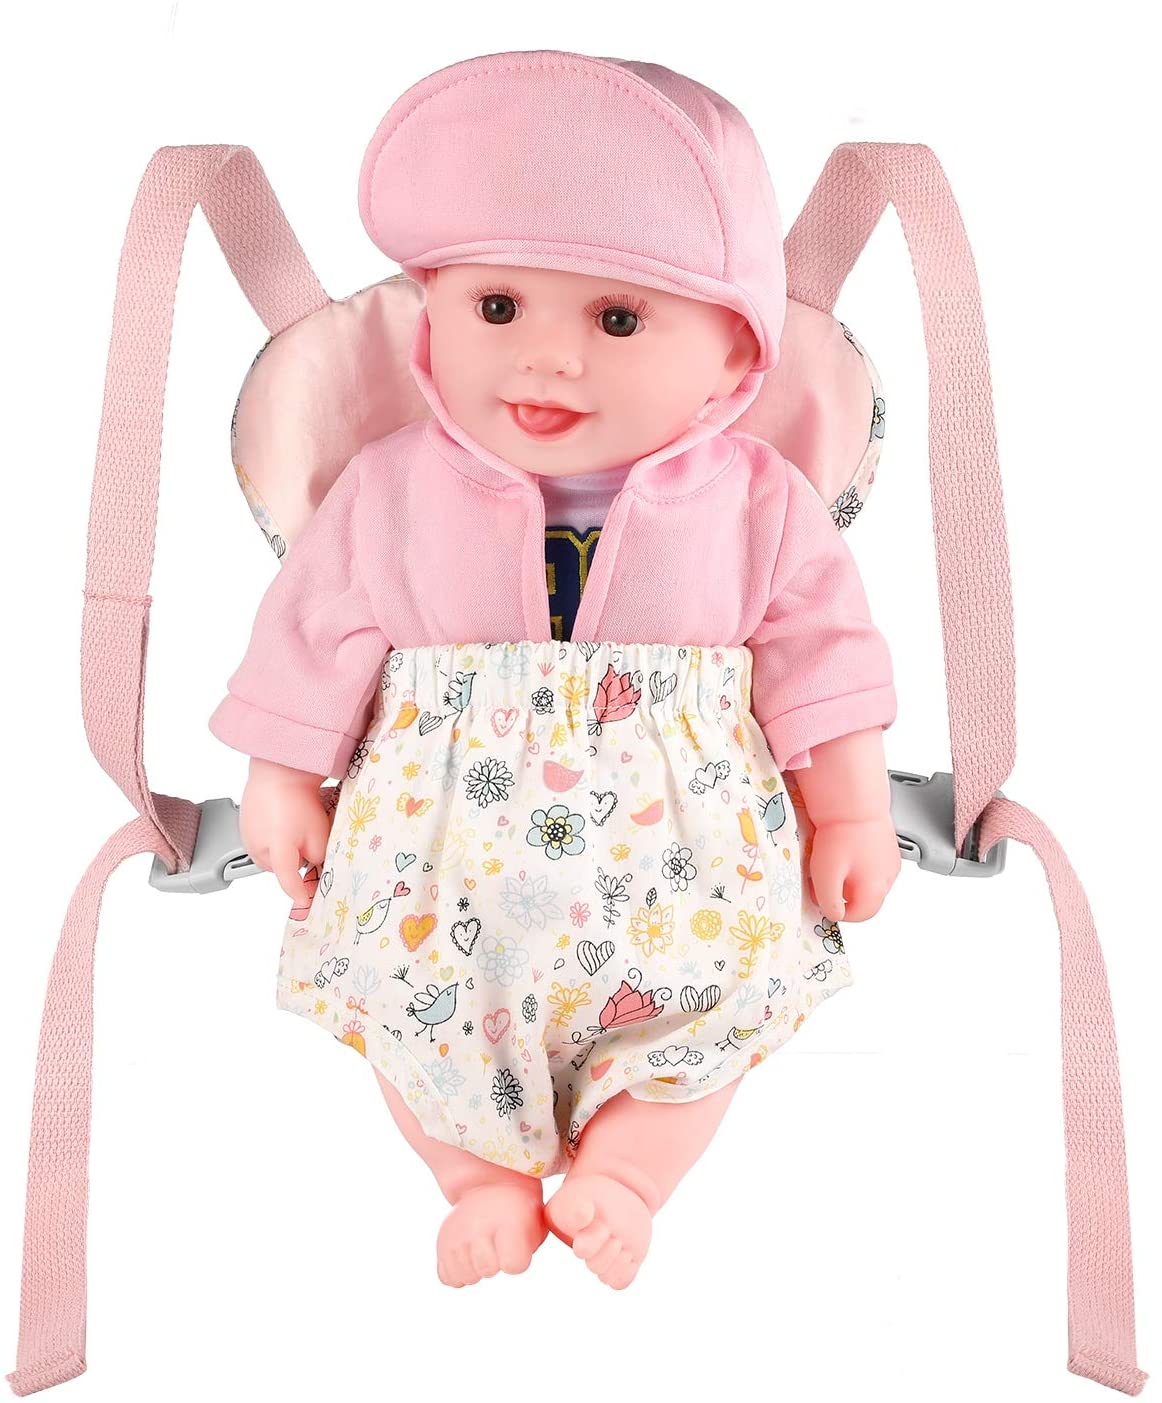 GAGAKU Doll Carrier Soft Cotton Front and Back Carrying with Adjustable Straps for Baby Over 18 Months